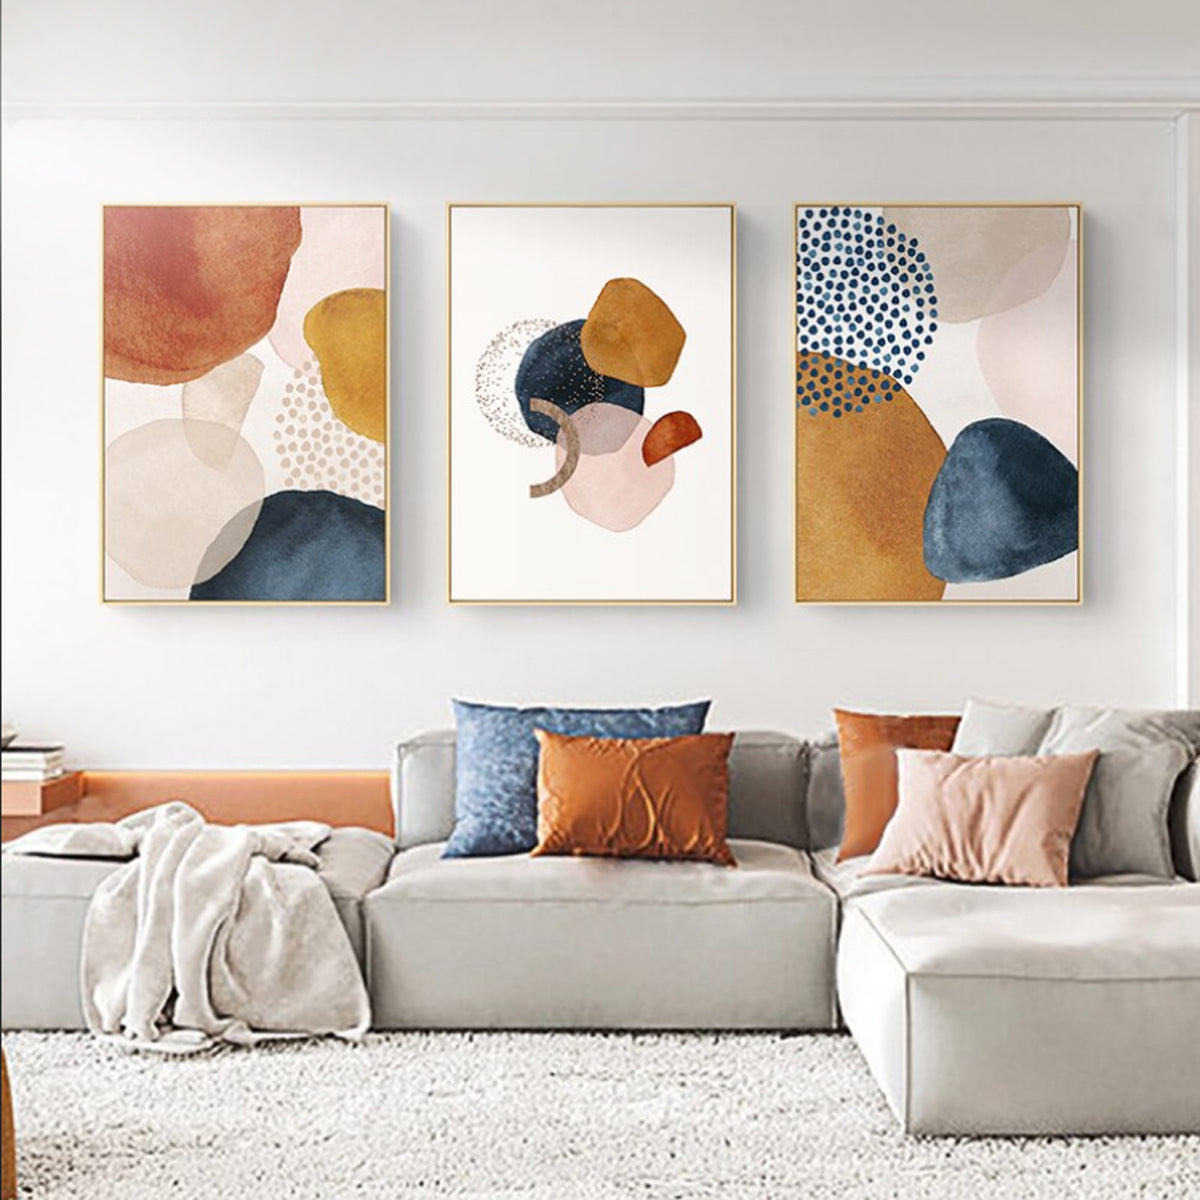 TPFLiving Canvas in - Art Art Bro Traumpreisfabrik Nordic Shapes – Picture Print Abstract